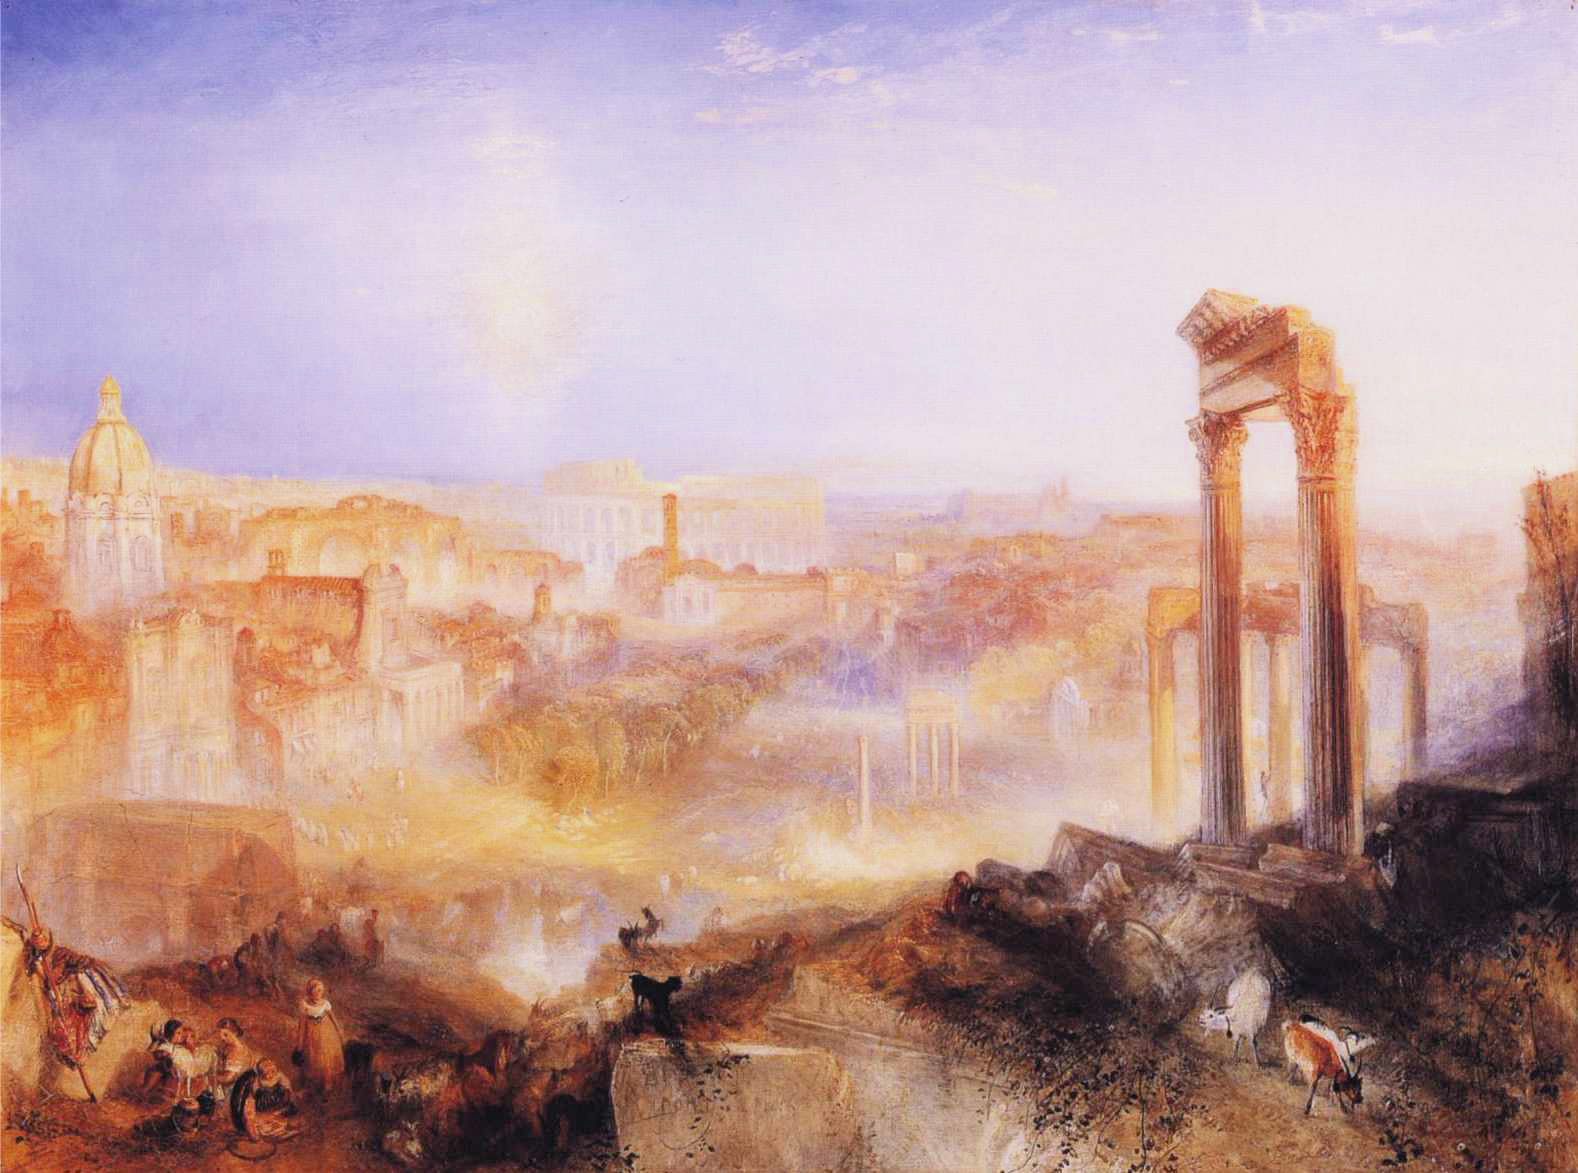 William Turner, Modern Rome - Campo Vacino, 1839, Sotheby's